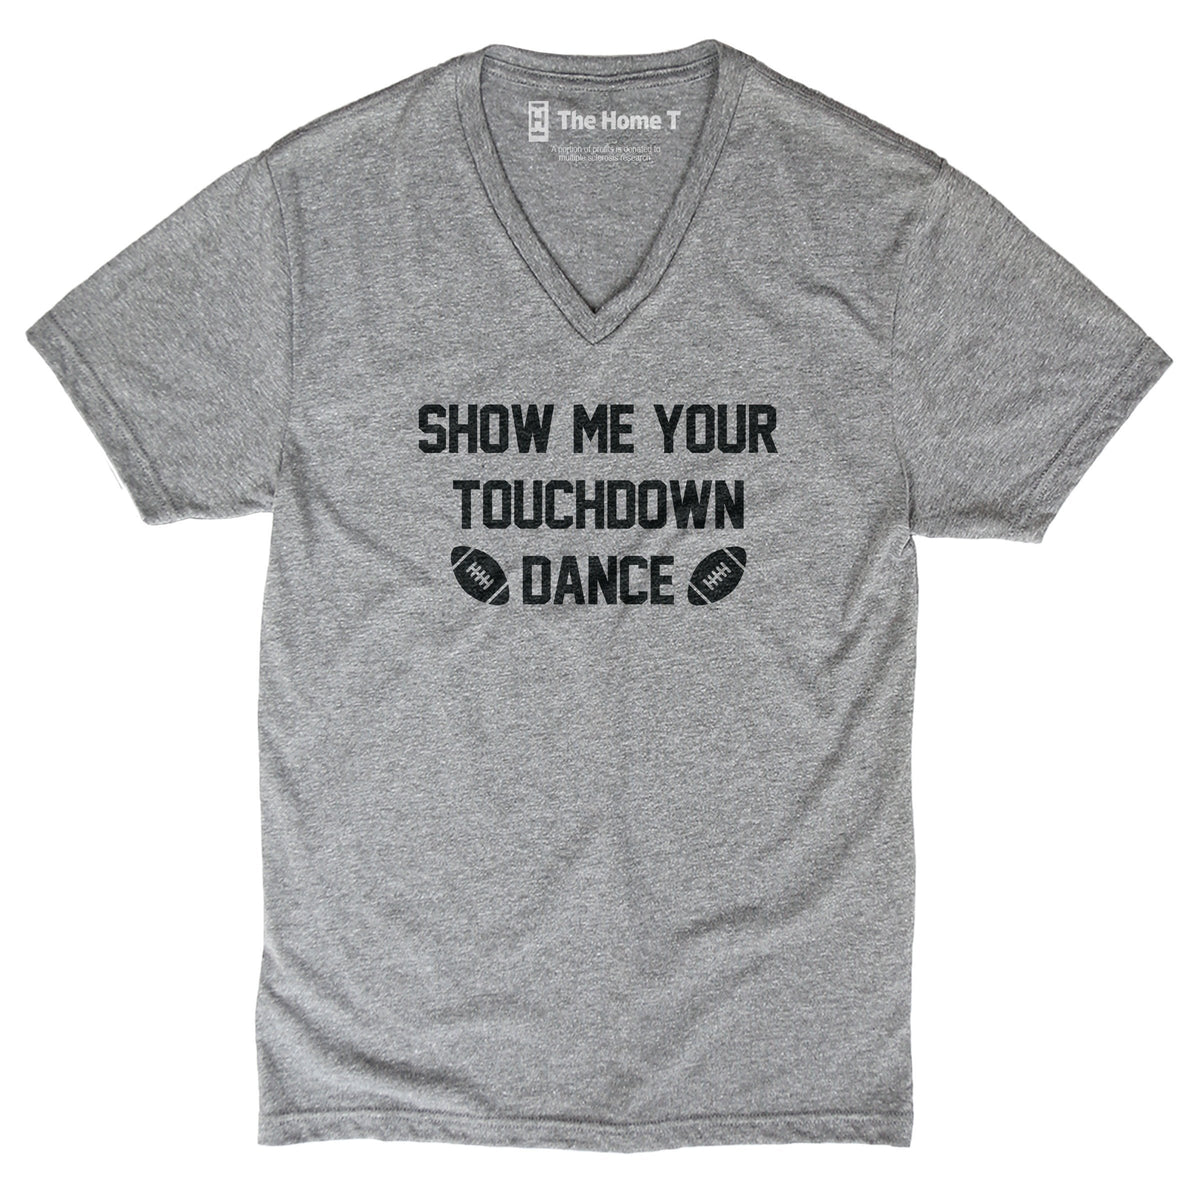 Touchdown Dance Crew neck The Home T XS V-Neck